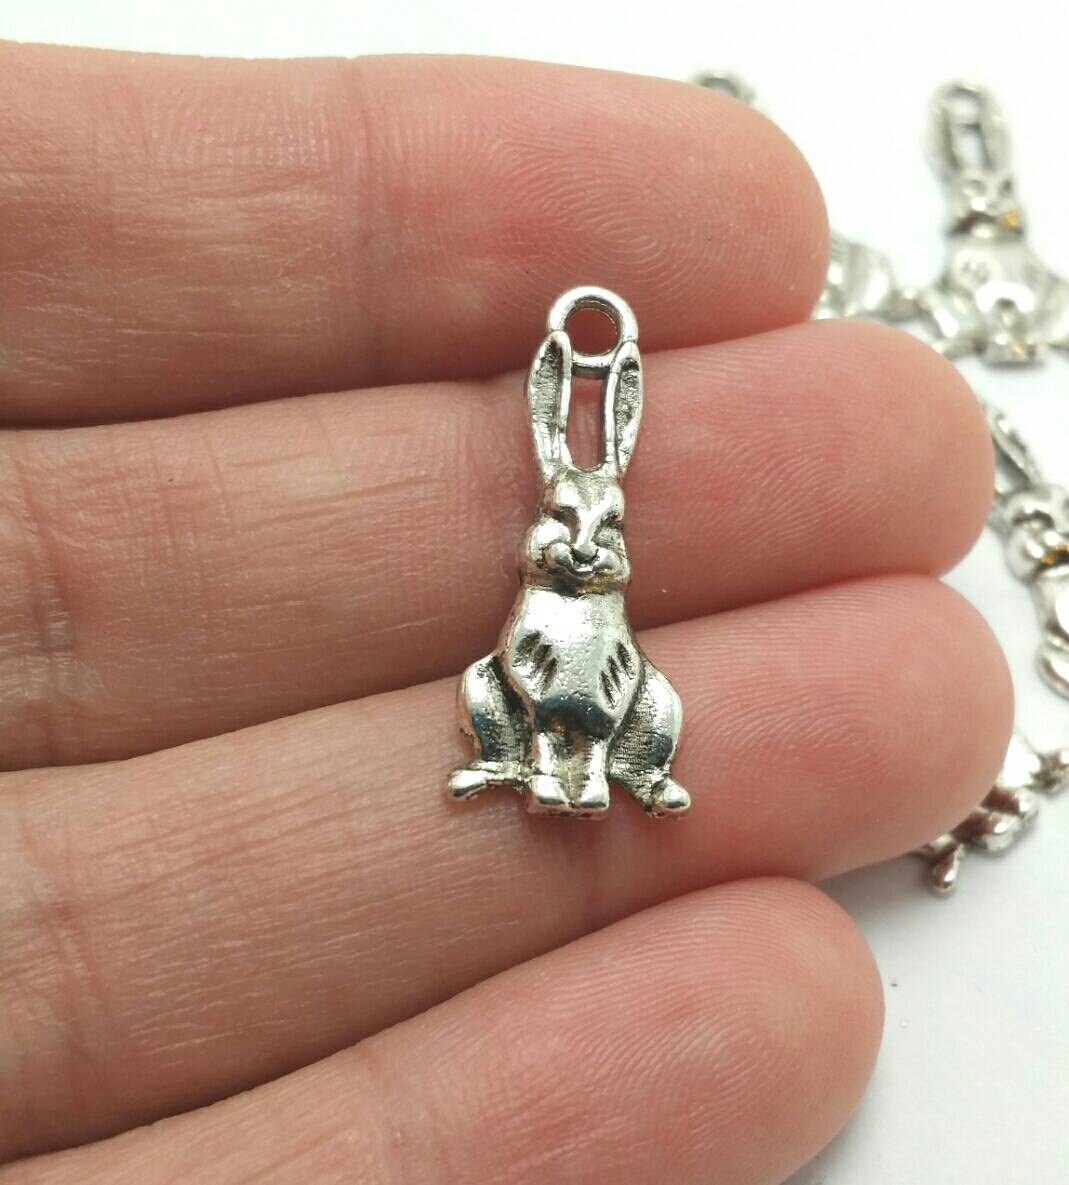 munching on a carrot...Very Cute! Universal use for Jewellery Check out our Fantastic wide range of EASTER Beads Card Making and Scrap-booking 10 x Antique Silver Bunny Rabbit Charms EASTER Charms and Findings with Jump Rings included for attachments 